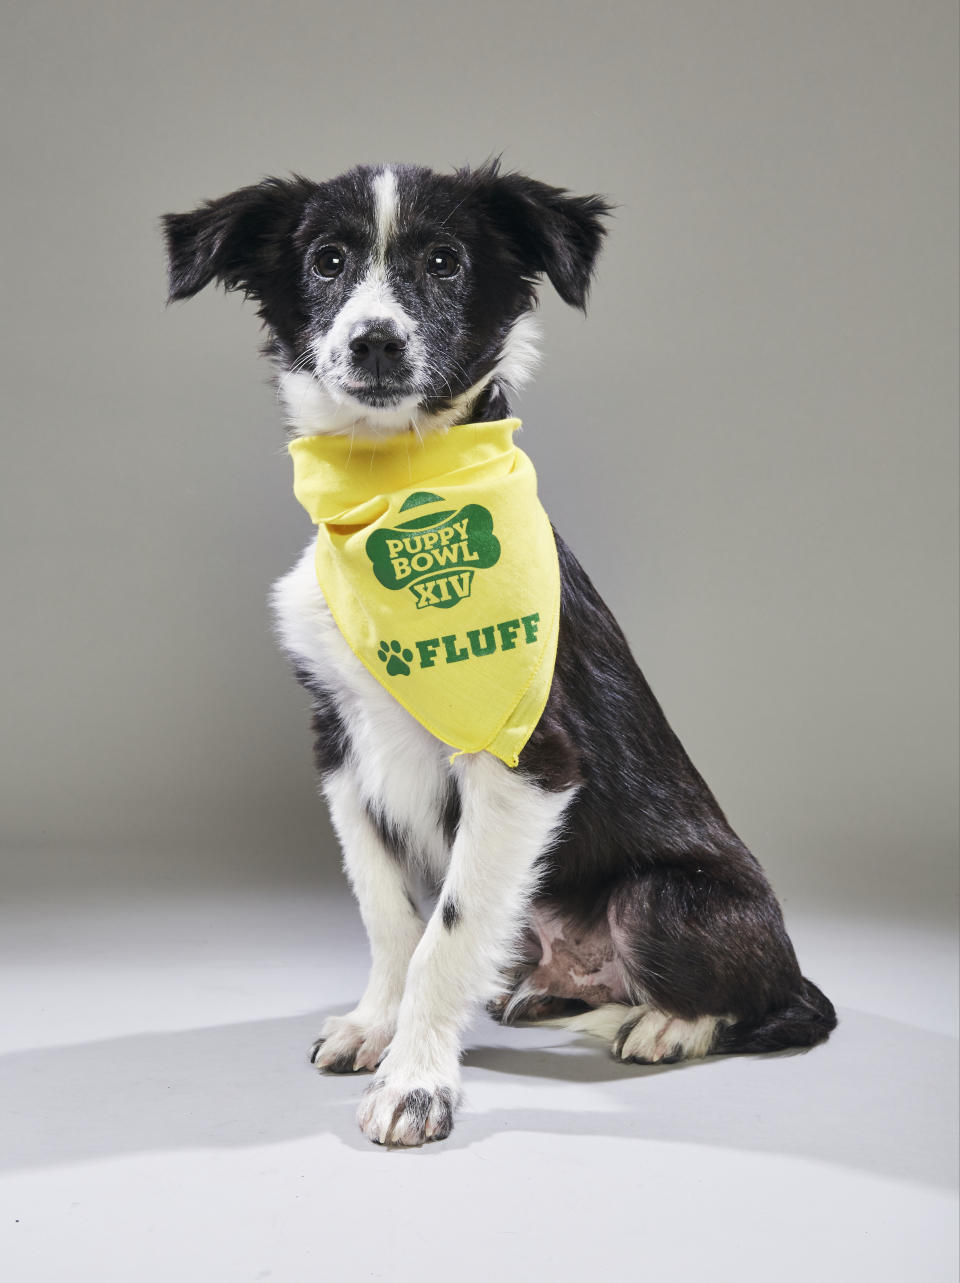 <p>Team: Fluff<br> From: Compassion Without Borders<br> (Photo: Animal Planet) </p>